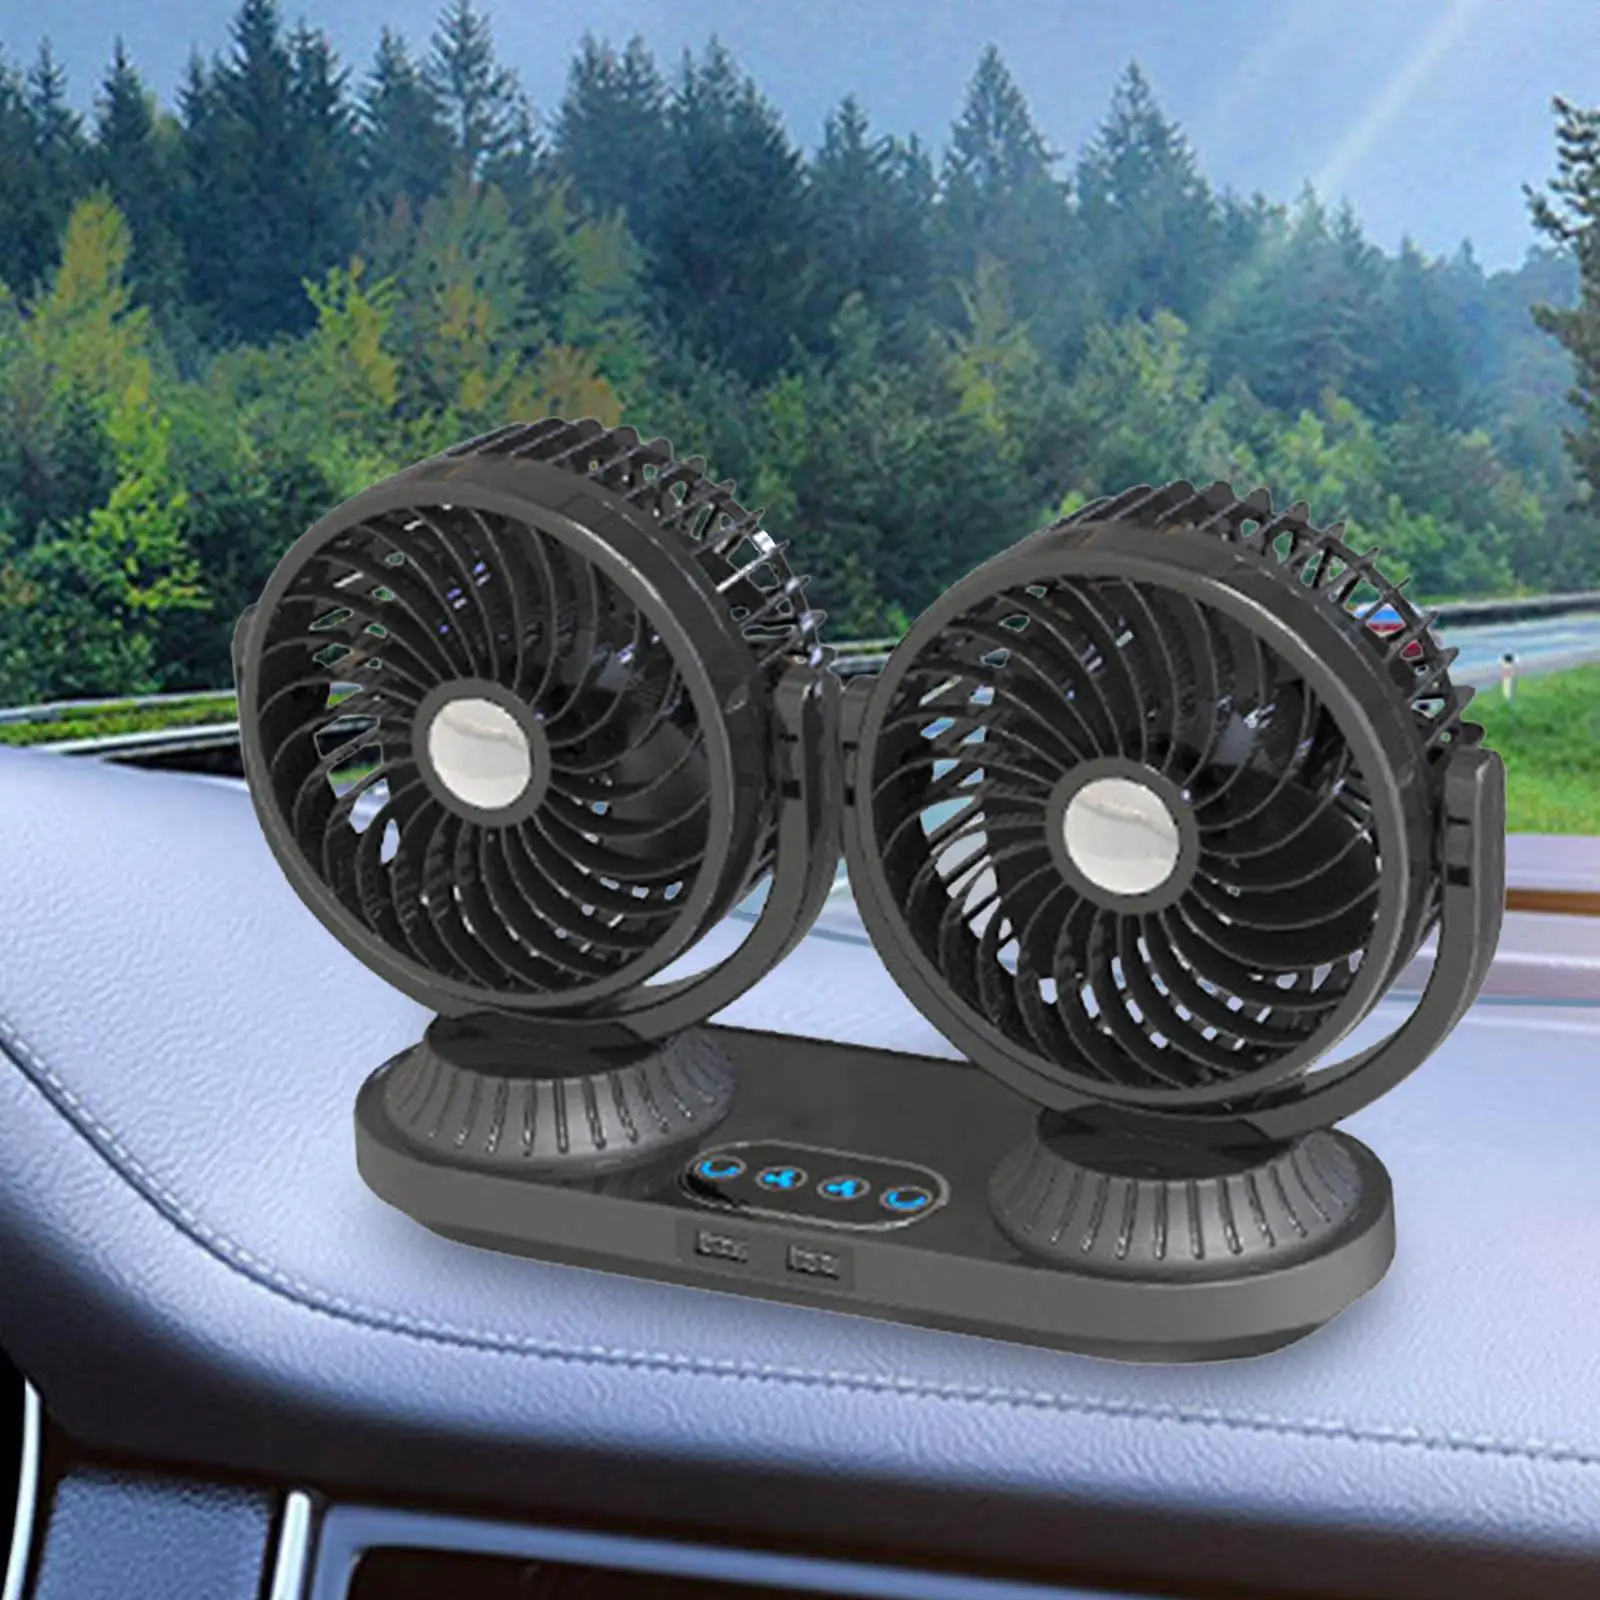 Dual Heads Car Fan 12V 24V Universal Flexible 360 Rotatable Summer Cooling Fan for Car Portable Strong Wind Dashboard Air Cooler